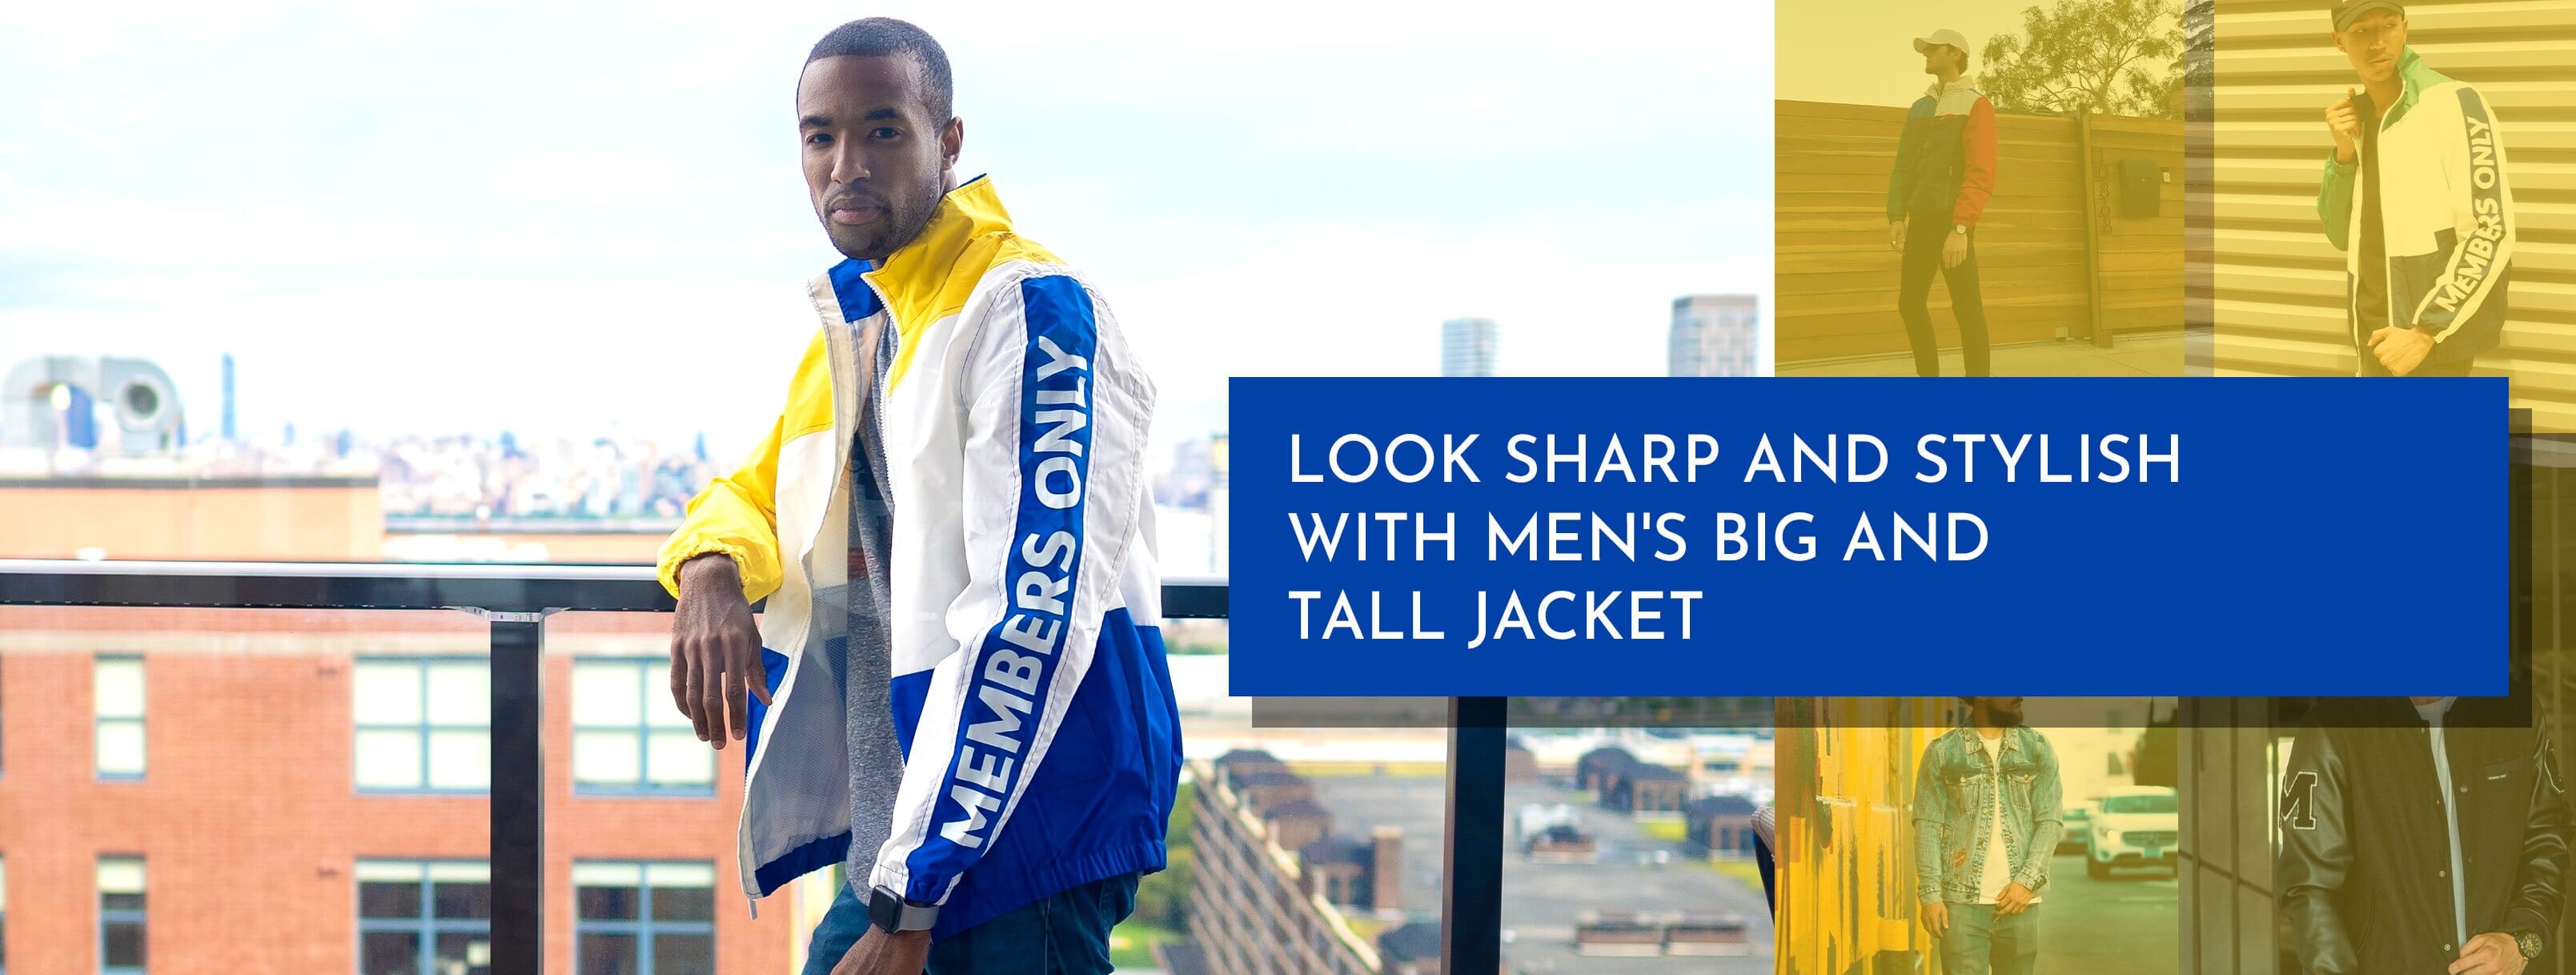 Members Only Big & Tall Big & Tall Classic Iconic Racer Jacket